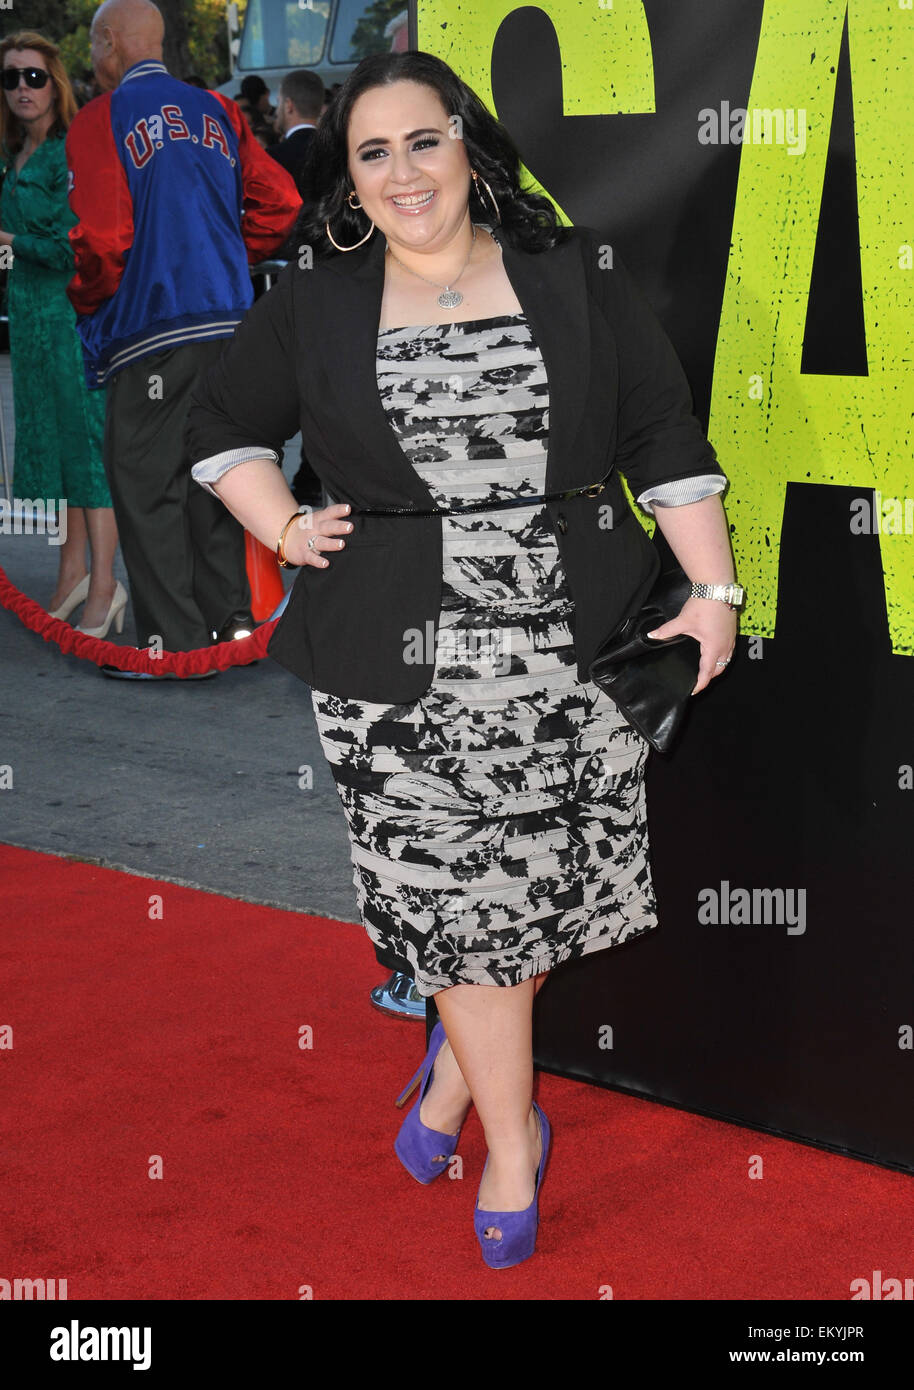 LOS ANGELES, CA - JUNE 26, 2012: Nikki Blonsky at the world premiere of 'Savages' at Mann Village Theatre, Westwood. Stock Photo